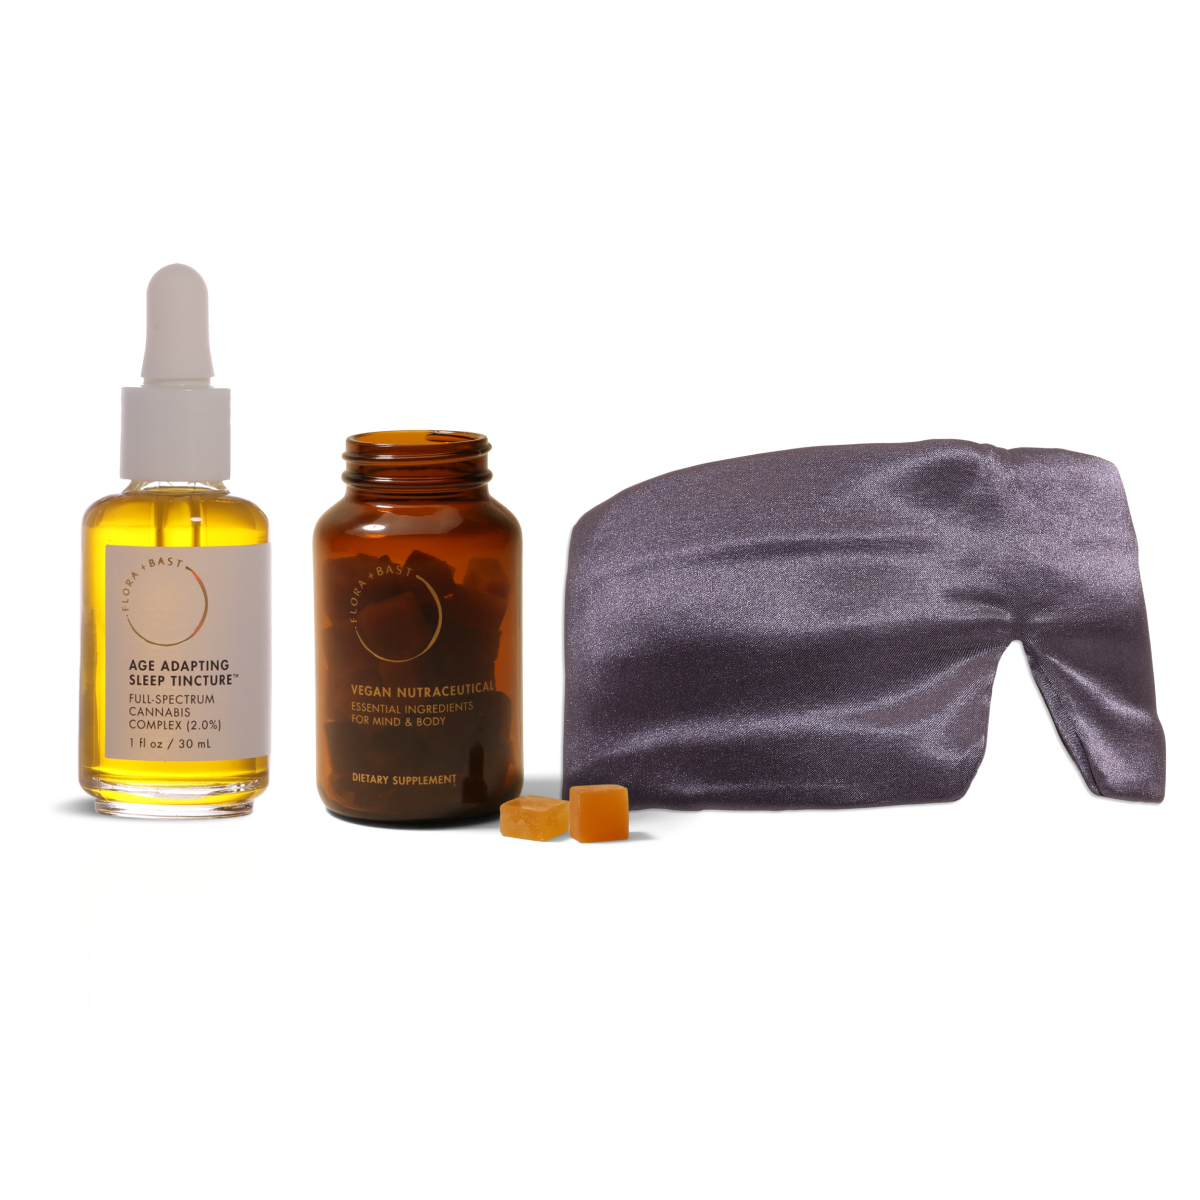 Regimen to improve sleep with ingestible gummies &amp; tincture and a comfortable sleep mask to block light